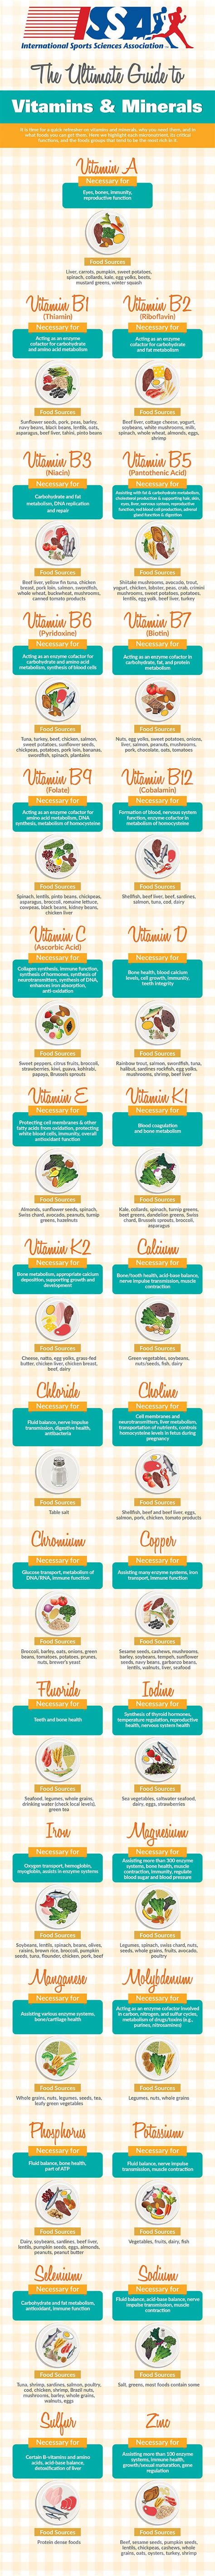 Vitamin b1(thiamin) processes carbohydrates into energy and is necessary for nerve cell function. Infographic: Guide to Vitamins & Minerals | ISSA